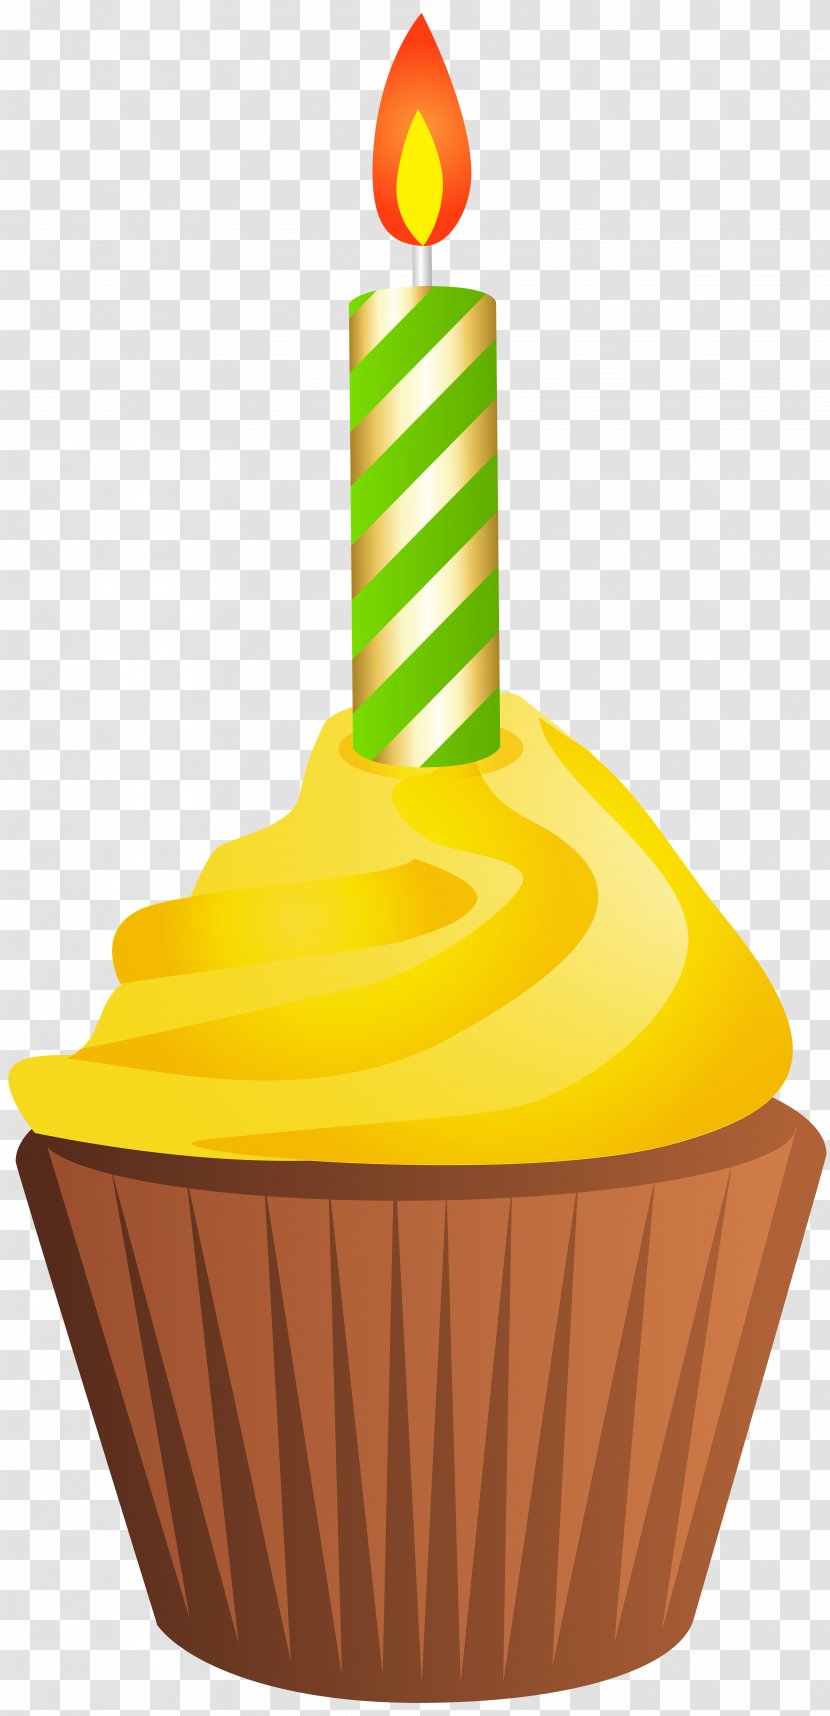 Muffin Birthday Cake Cupcake Clip Art - With Candle Image Transparent PNG